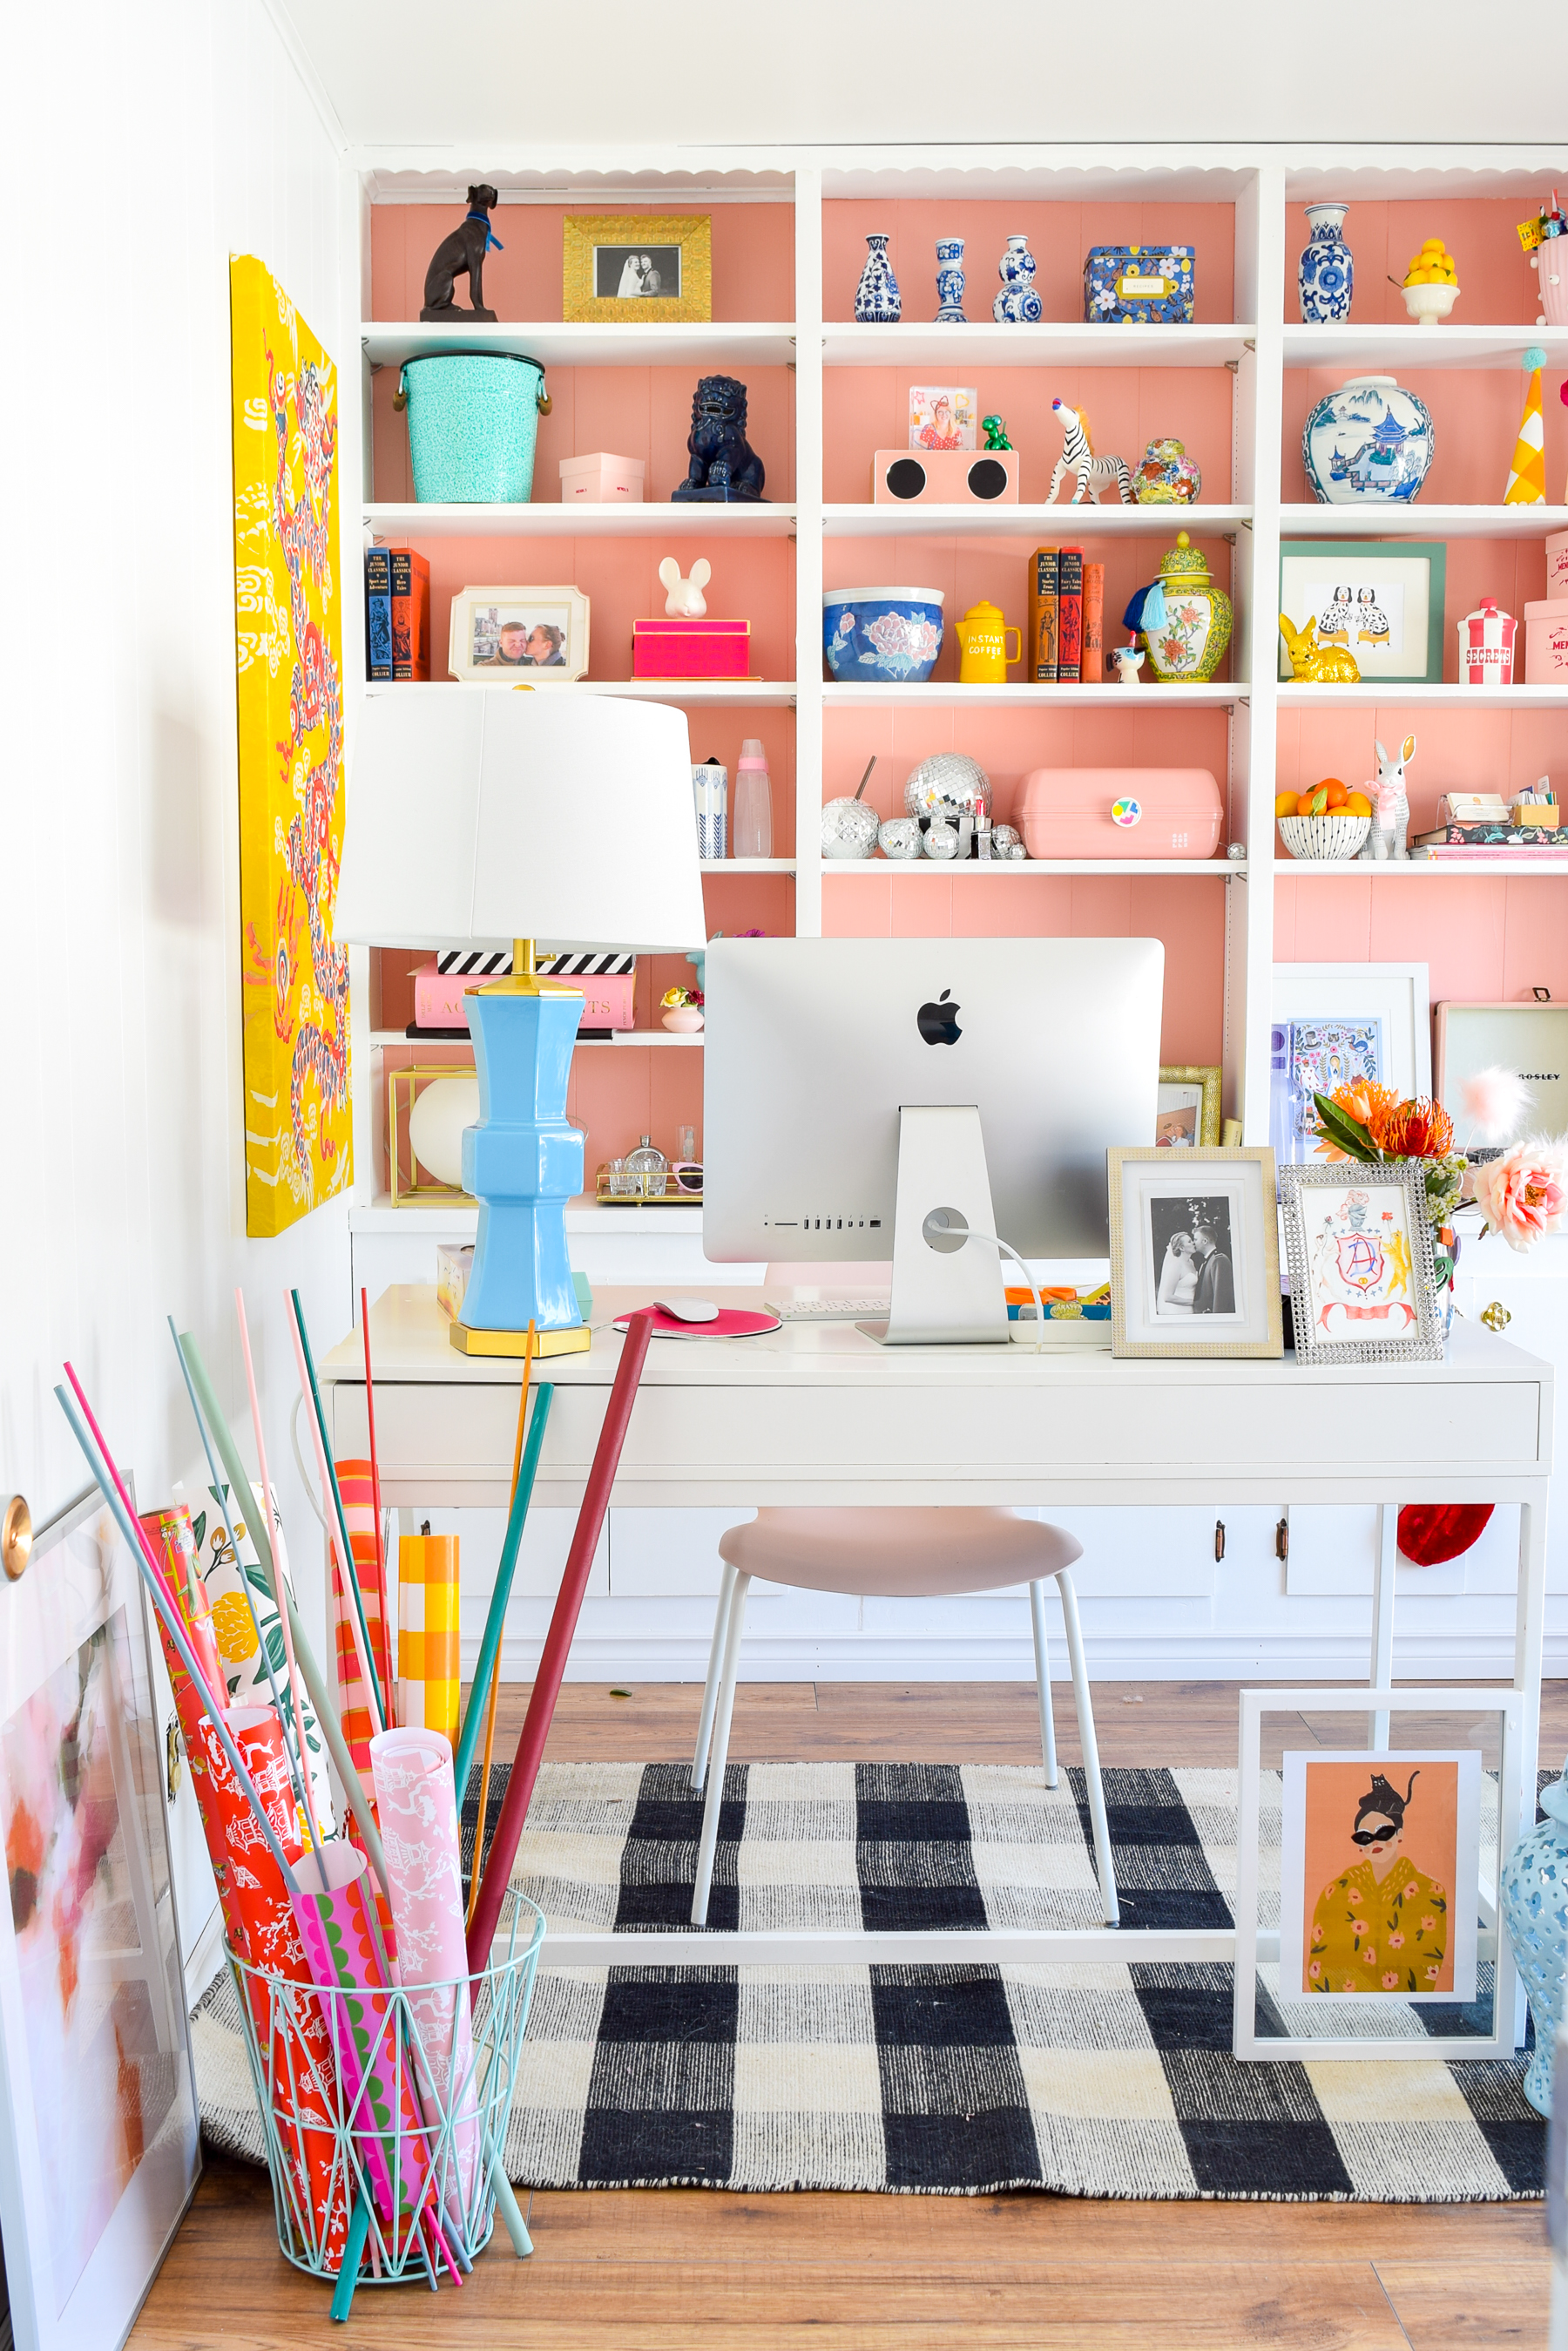 Craft Rooms Designs : Craft Room Home Studio Ideas / These 15 amazing craft room ideas are going to get you started on designing a great craft area in your home from storage to organization, decorating and more.